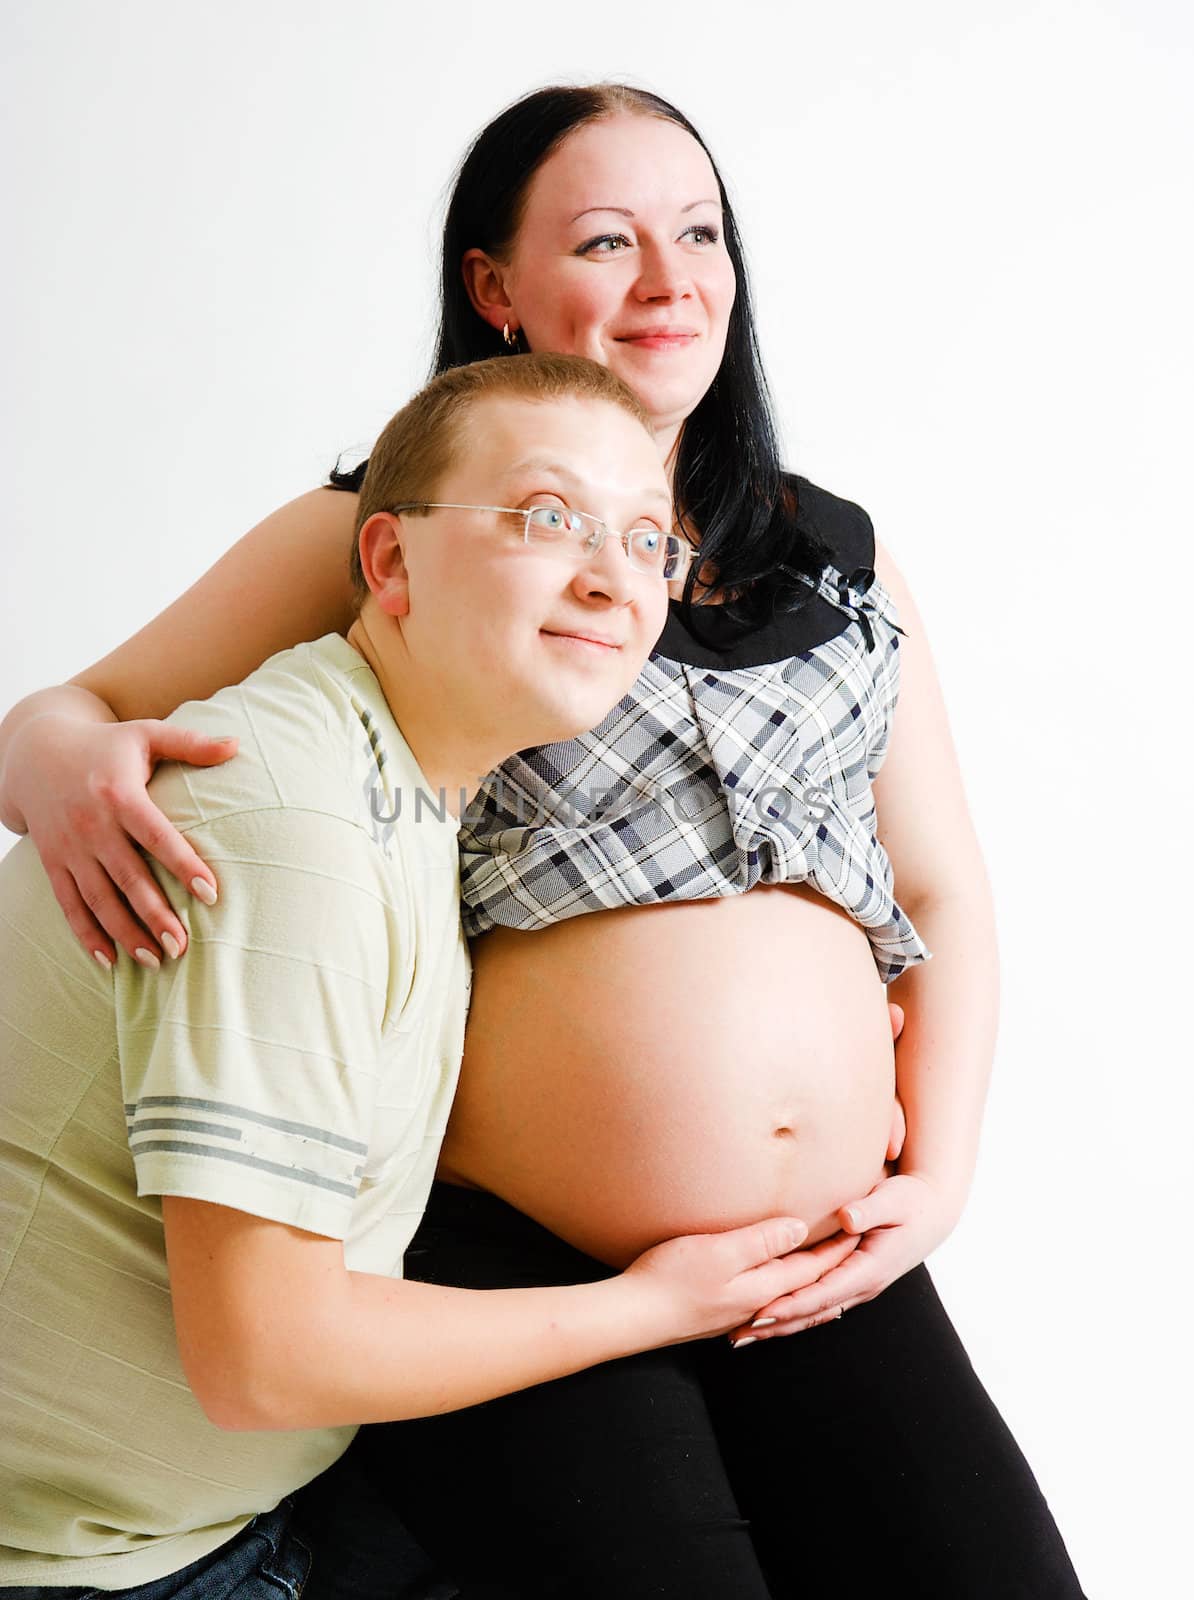 Young couple. A pregnant woman and a man